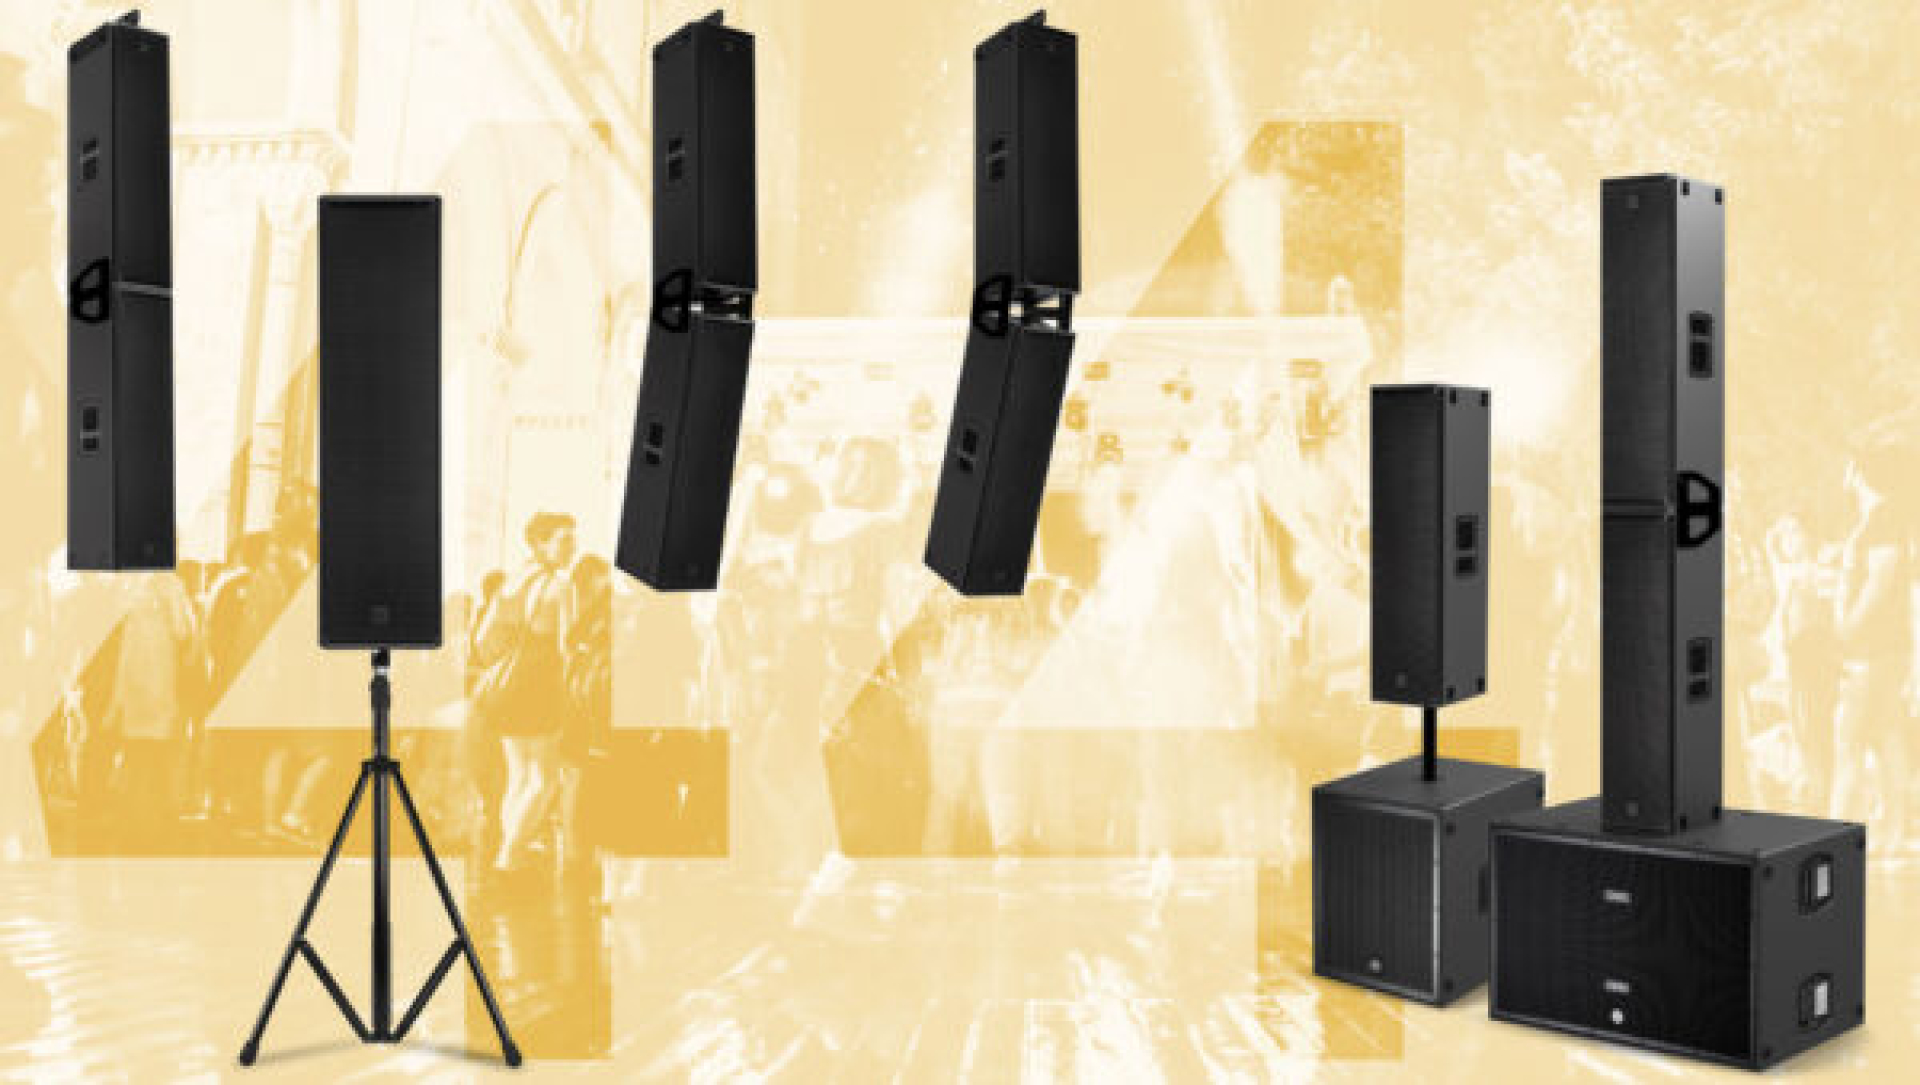 RCF Pro Sound Series Speaker Systems